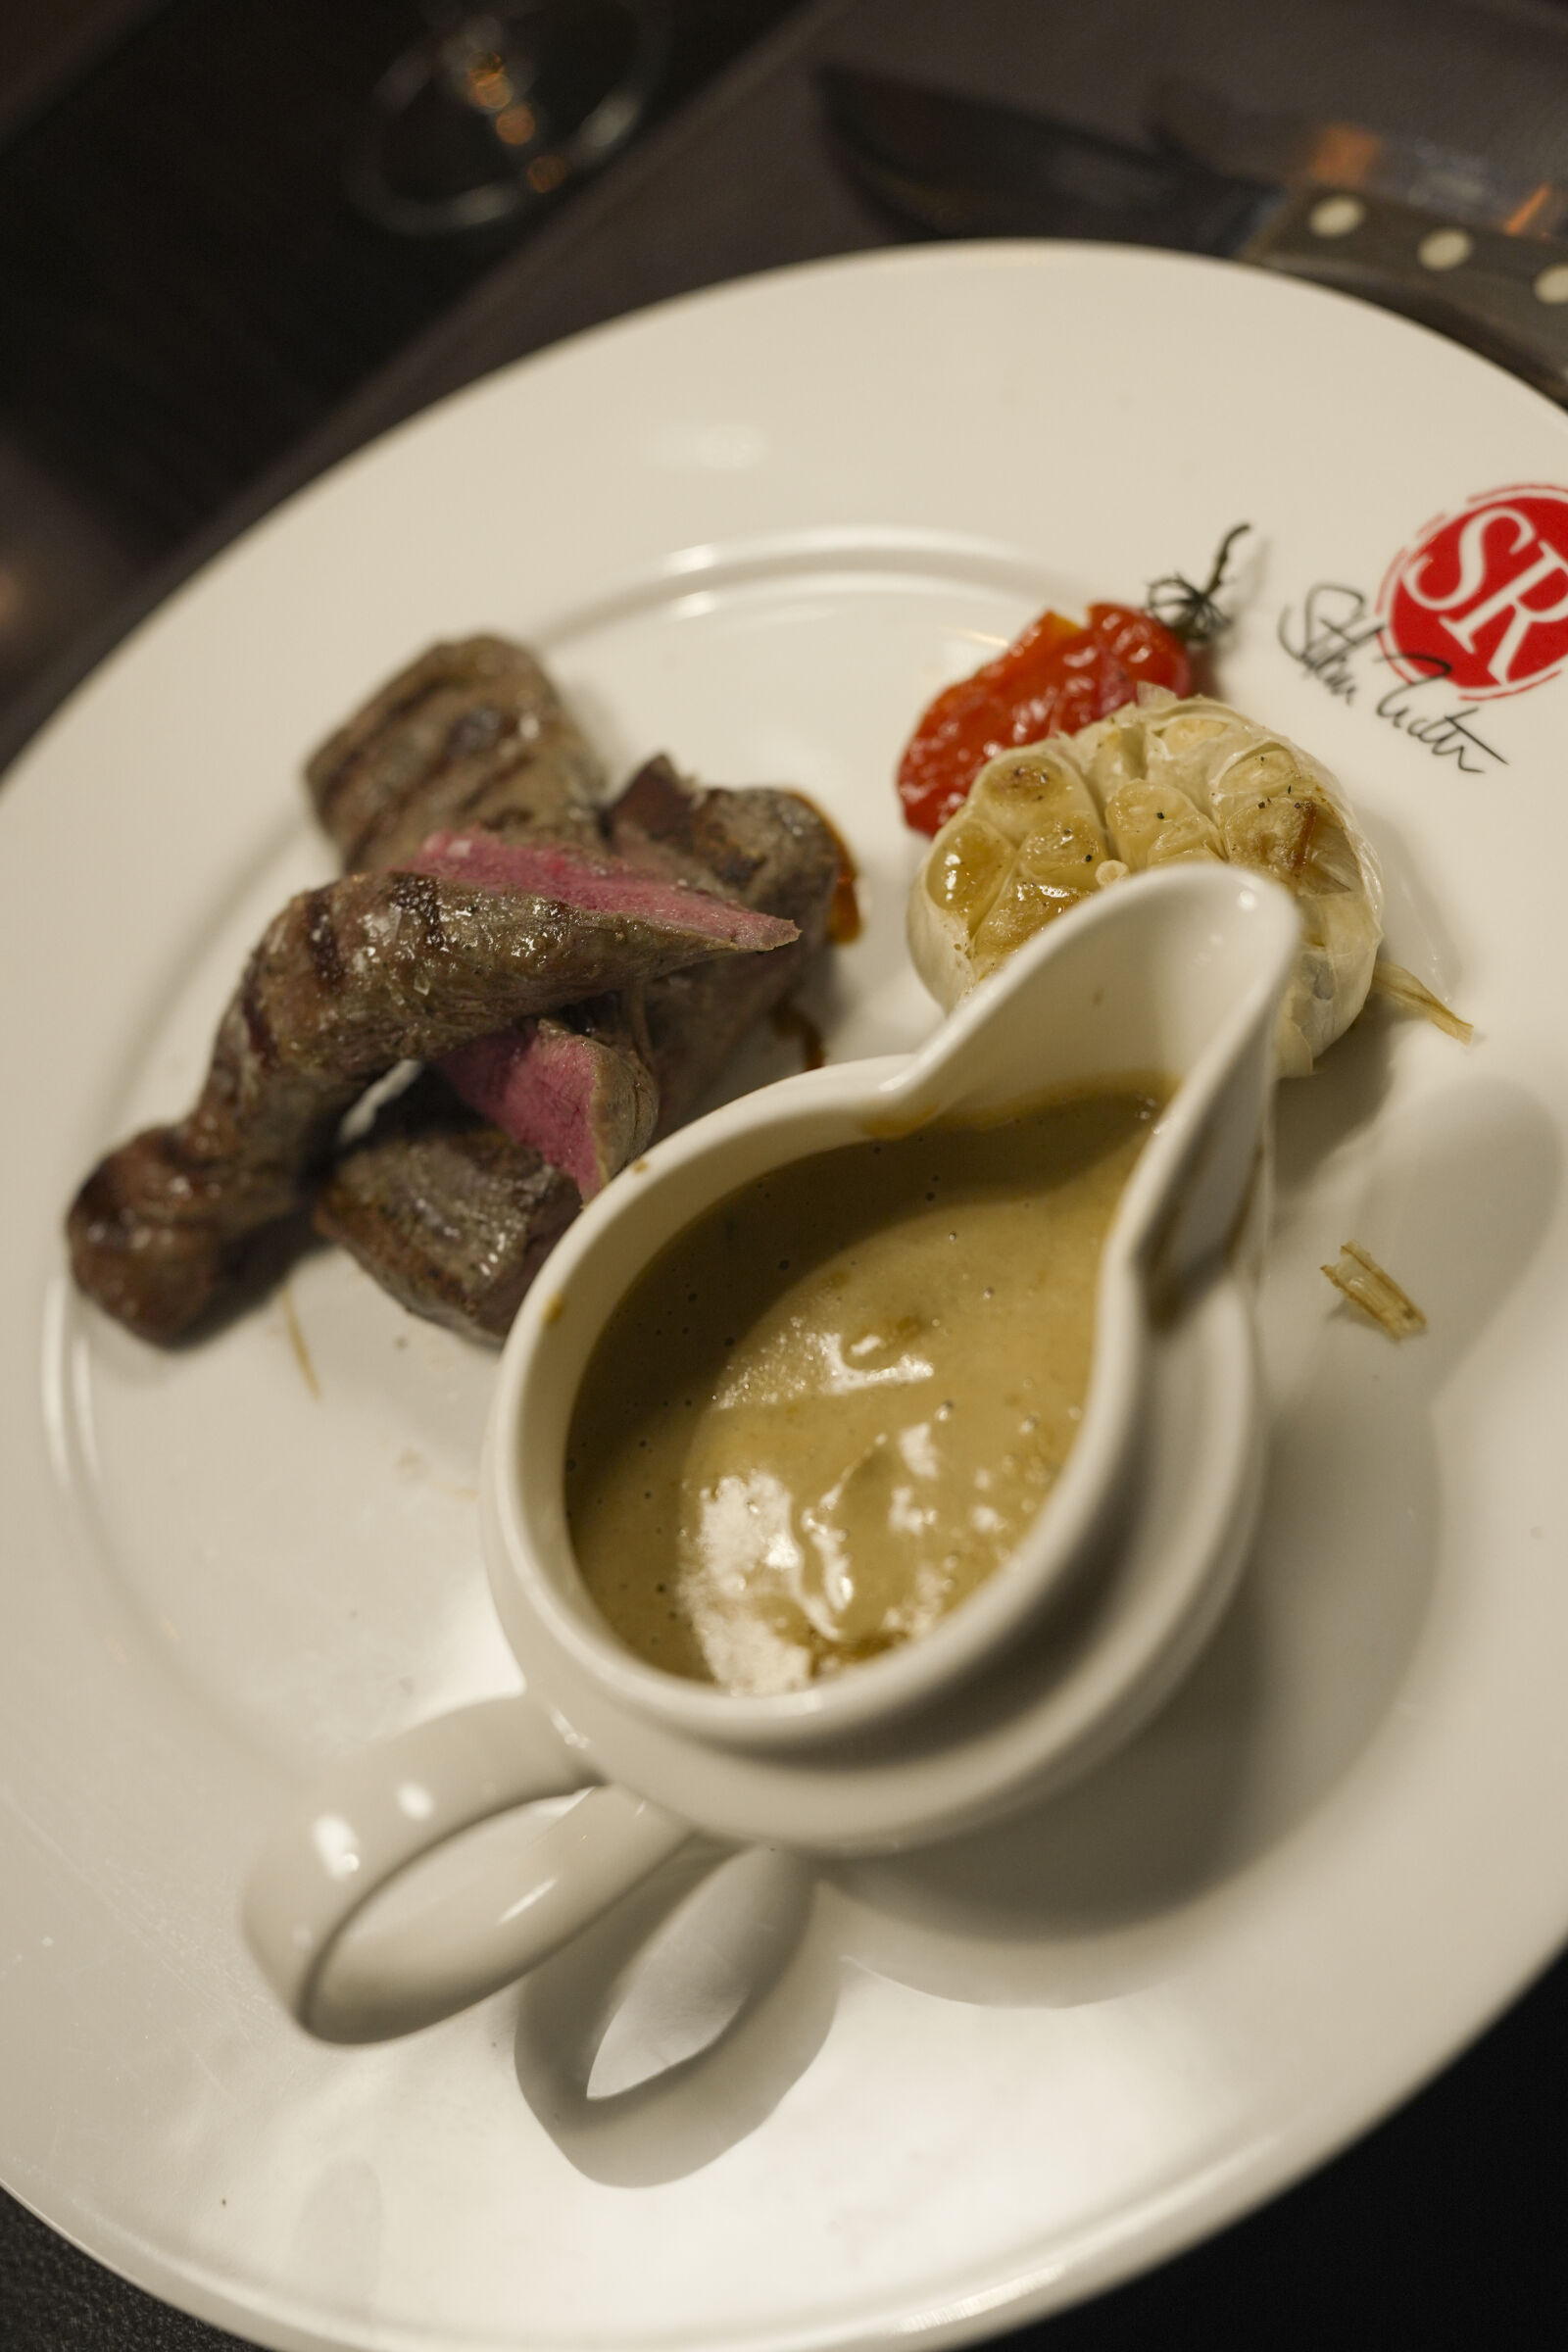 Sony FE 20mm F1.8G sample photo. Main course portion photography